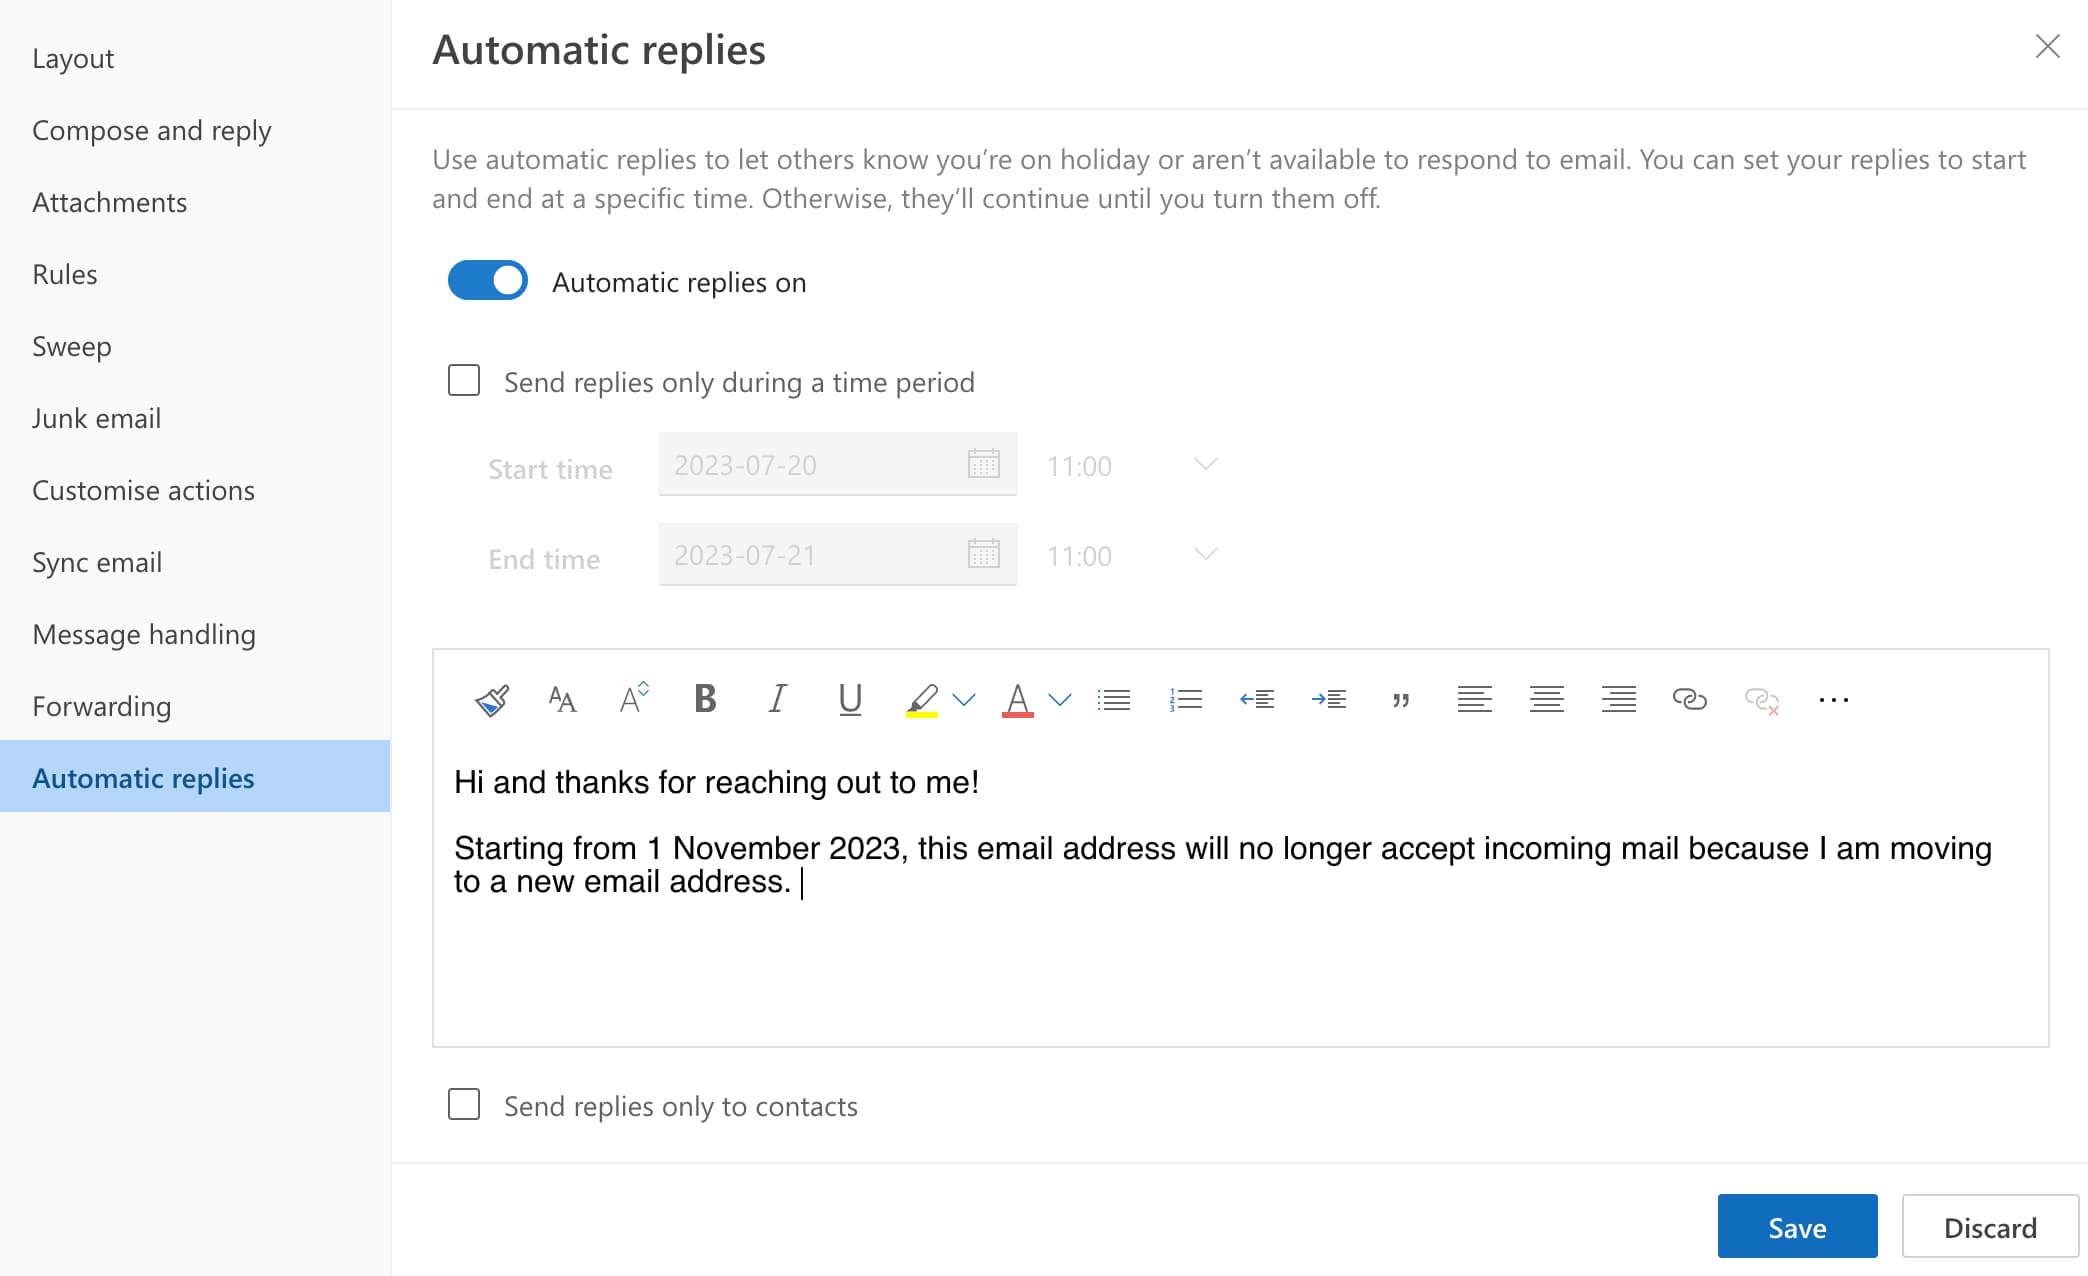 The menu for setting up automatic replies in Hotmail